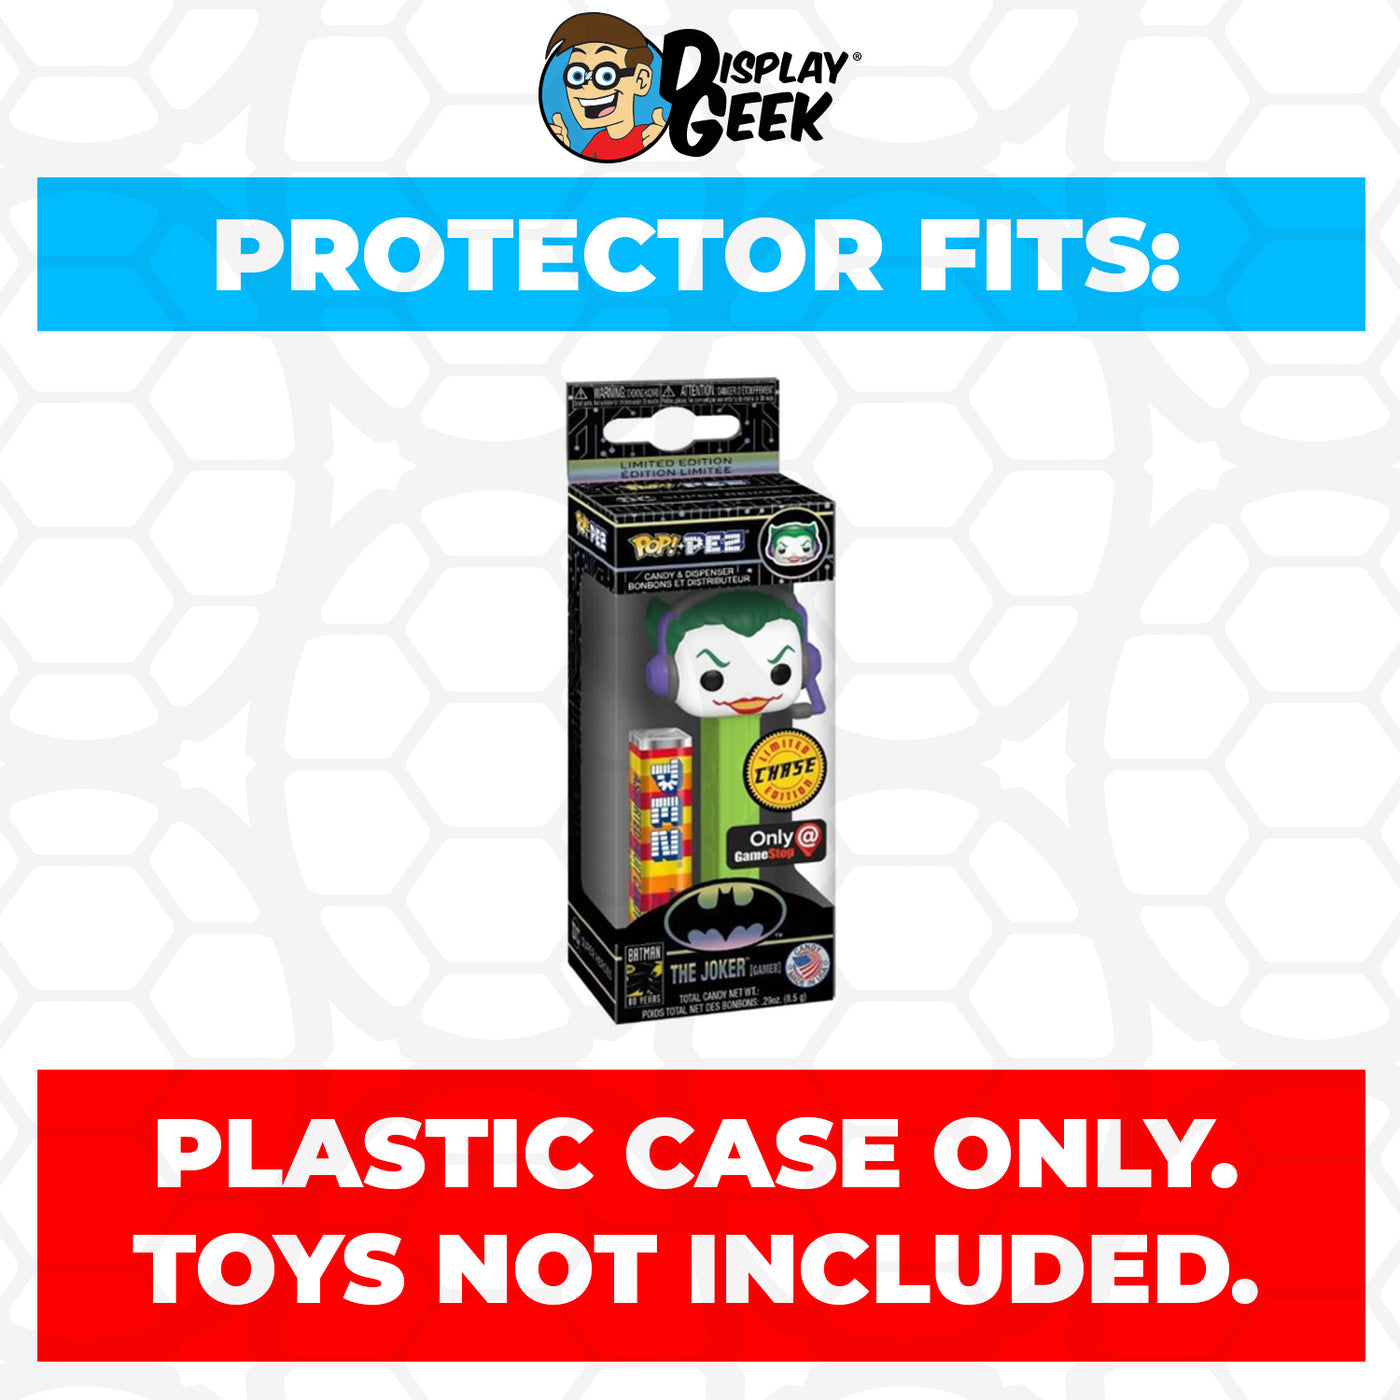 Pop Protector for The Joker Gamer Chase Funko Pop Pez on The Protector Guide App by Display Geek